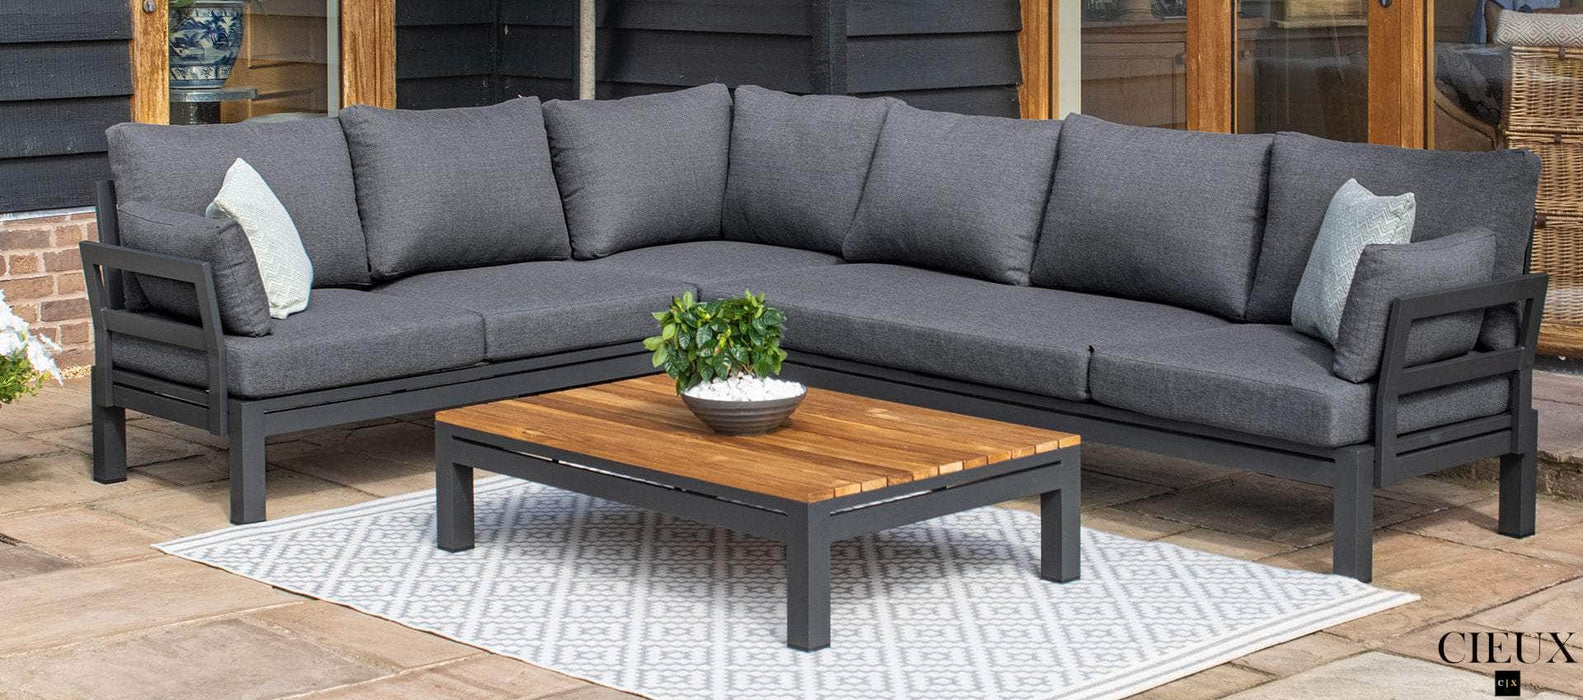 Pending - Cieux Sectional Bordeaux Outdoor Patio Aluminum Metal L-Shaped Corner Sectional with Adjustable Seat in Grey